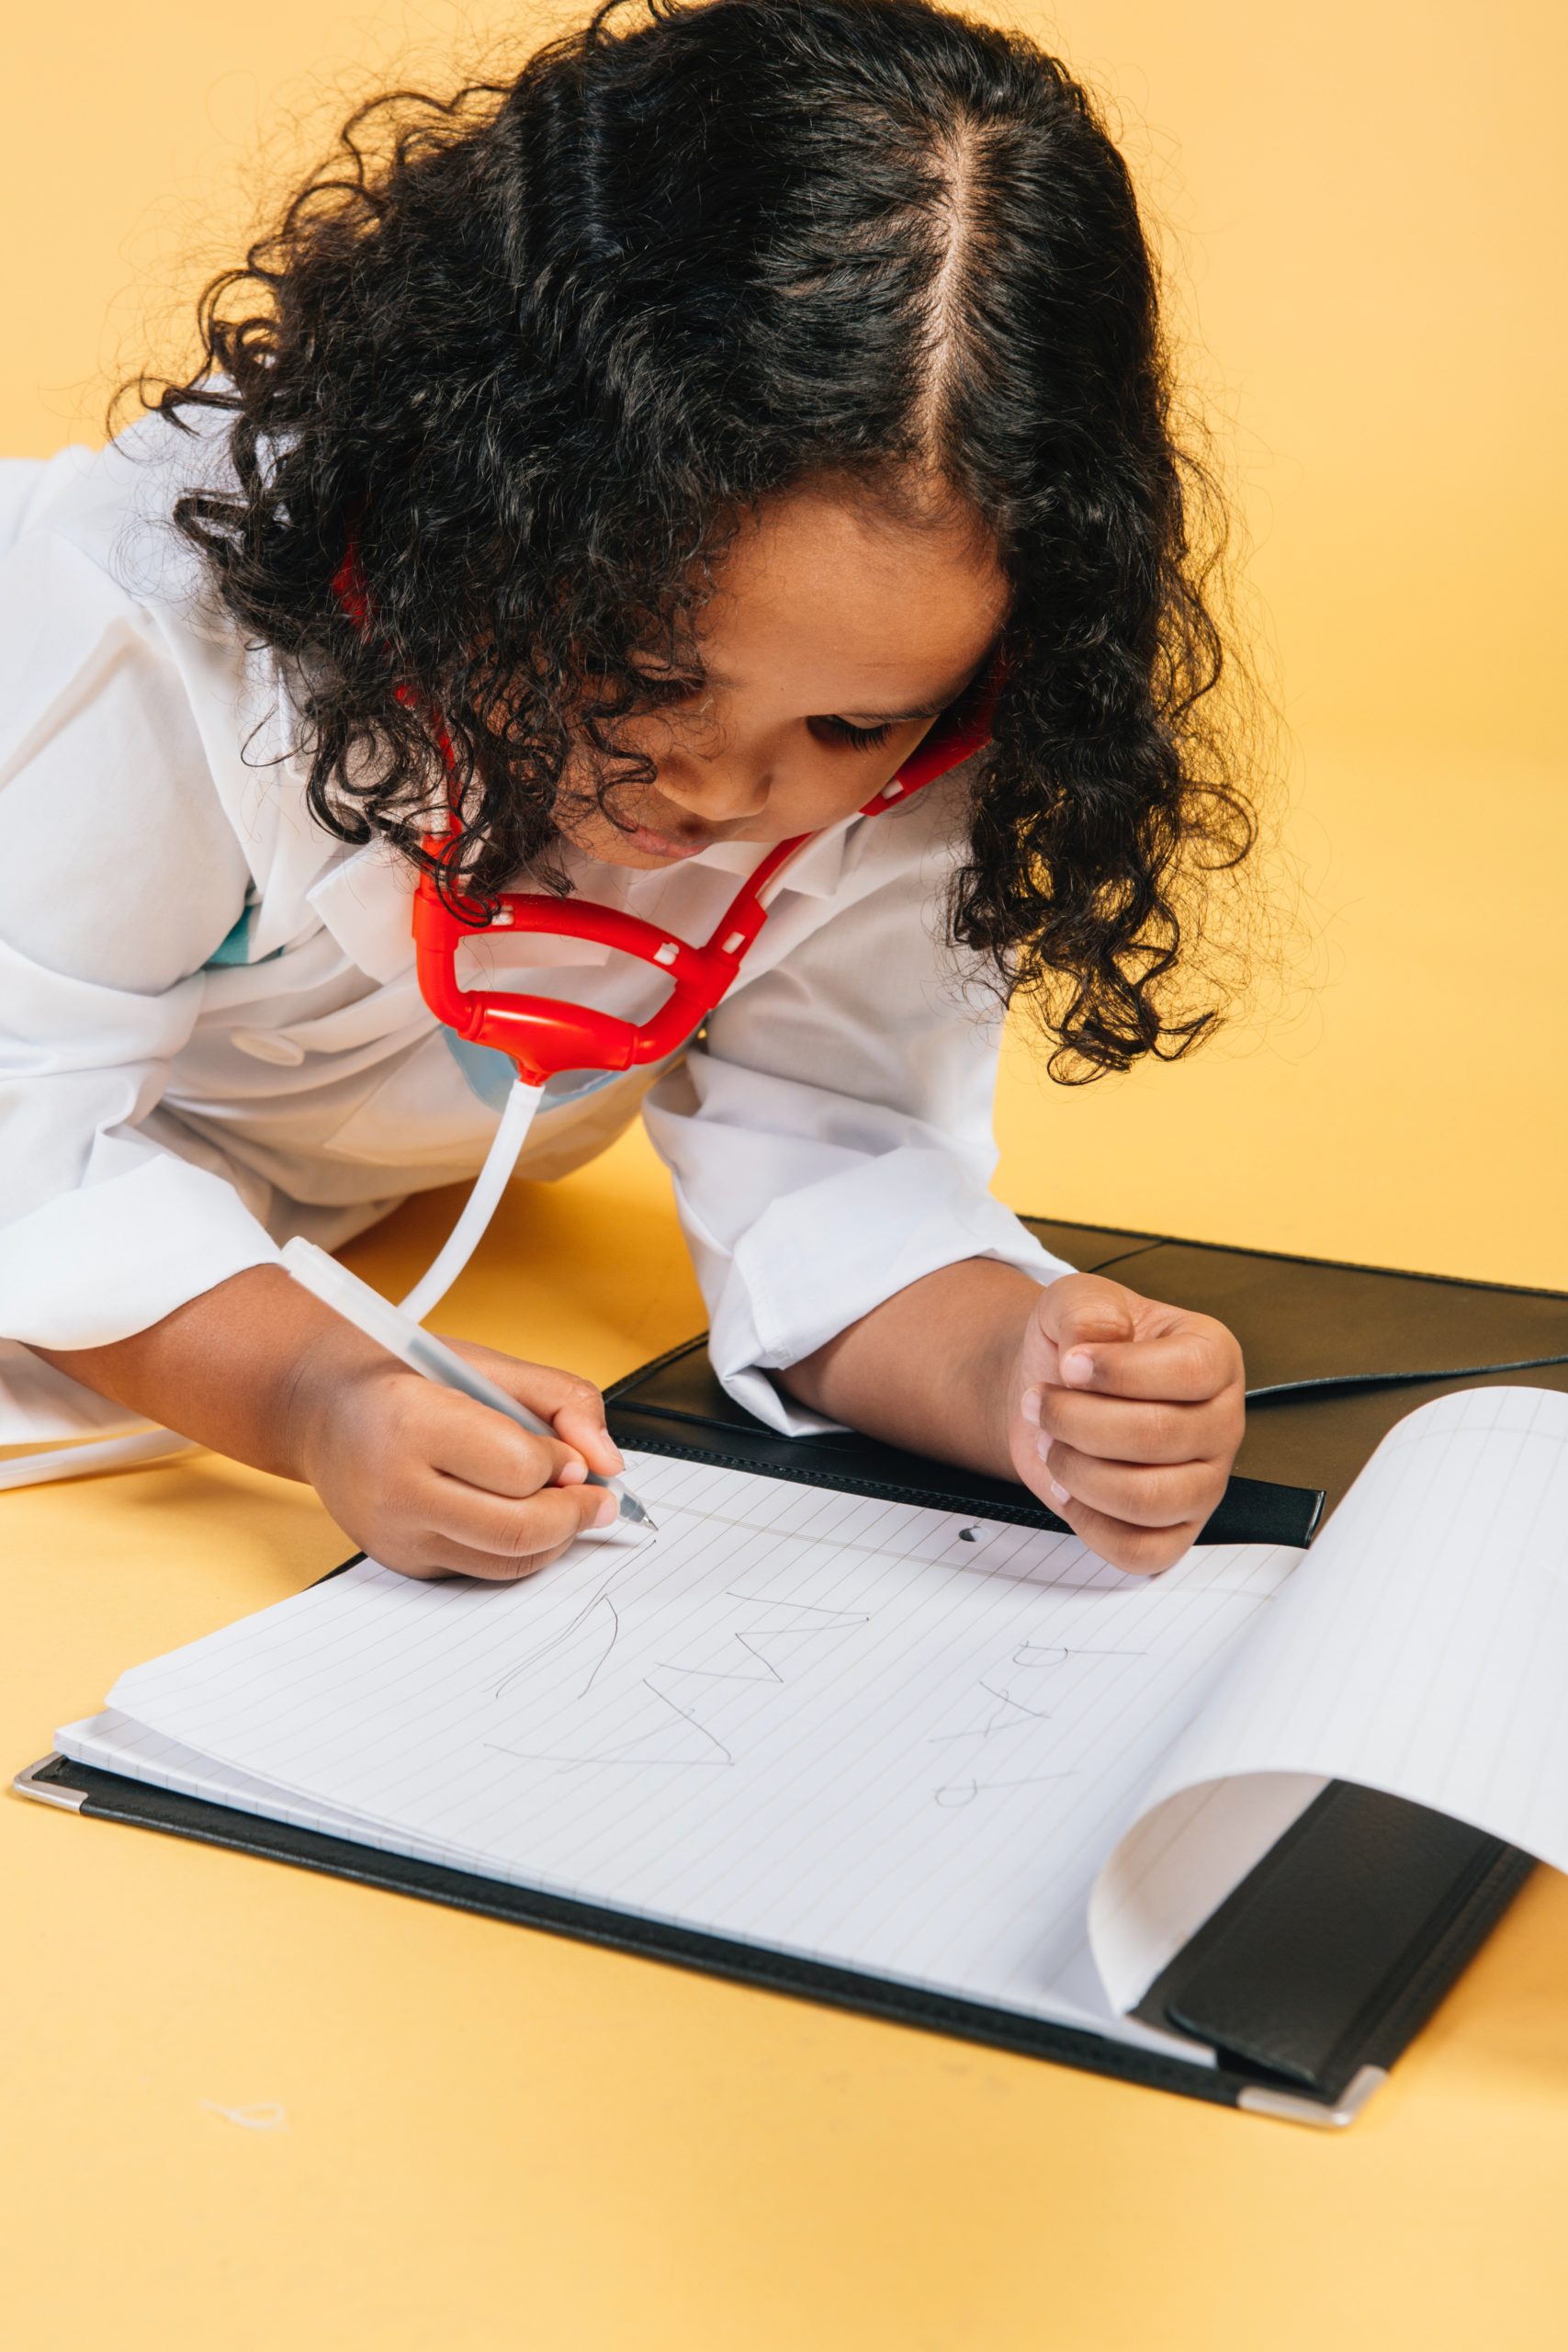 A child with brown curly hair wears a lab coat and a stethoscope and leans over a notebook.